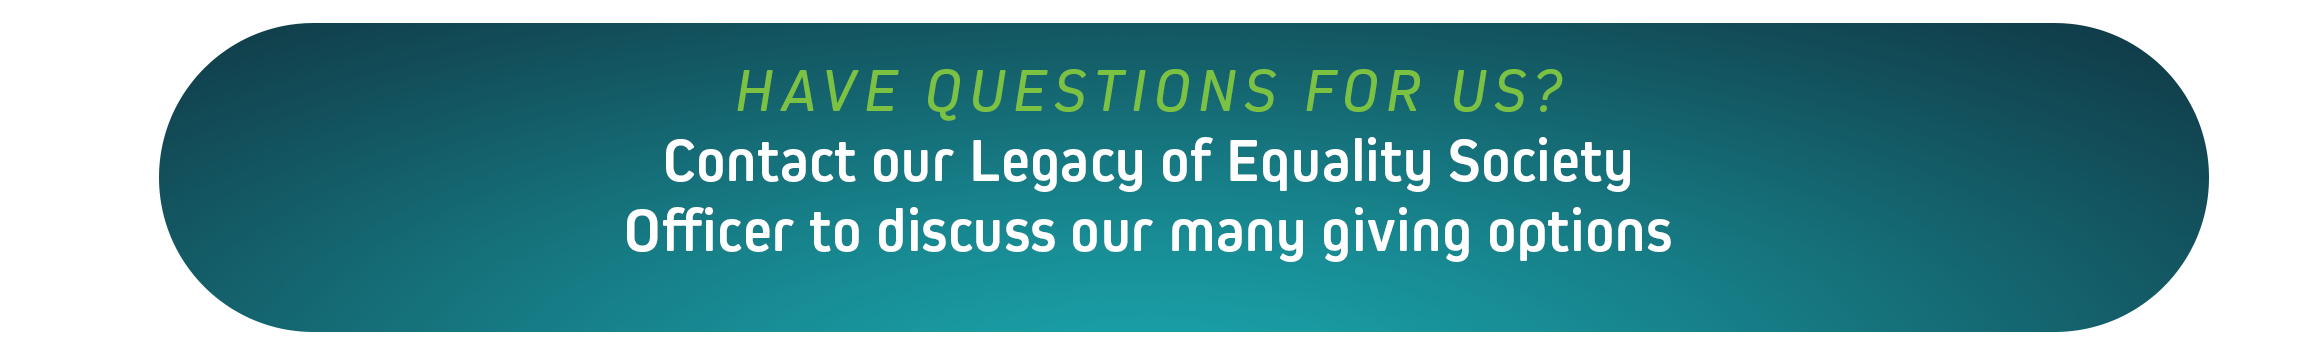 LEGACY_SOCIETY-questionsl.png